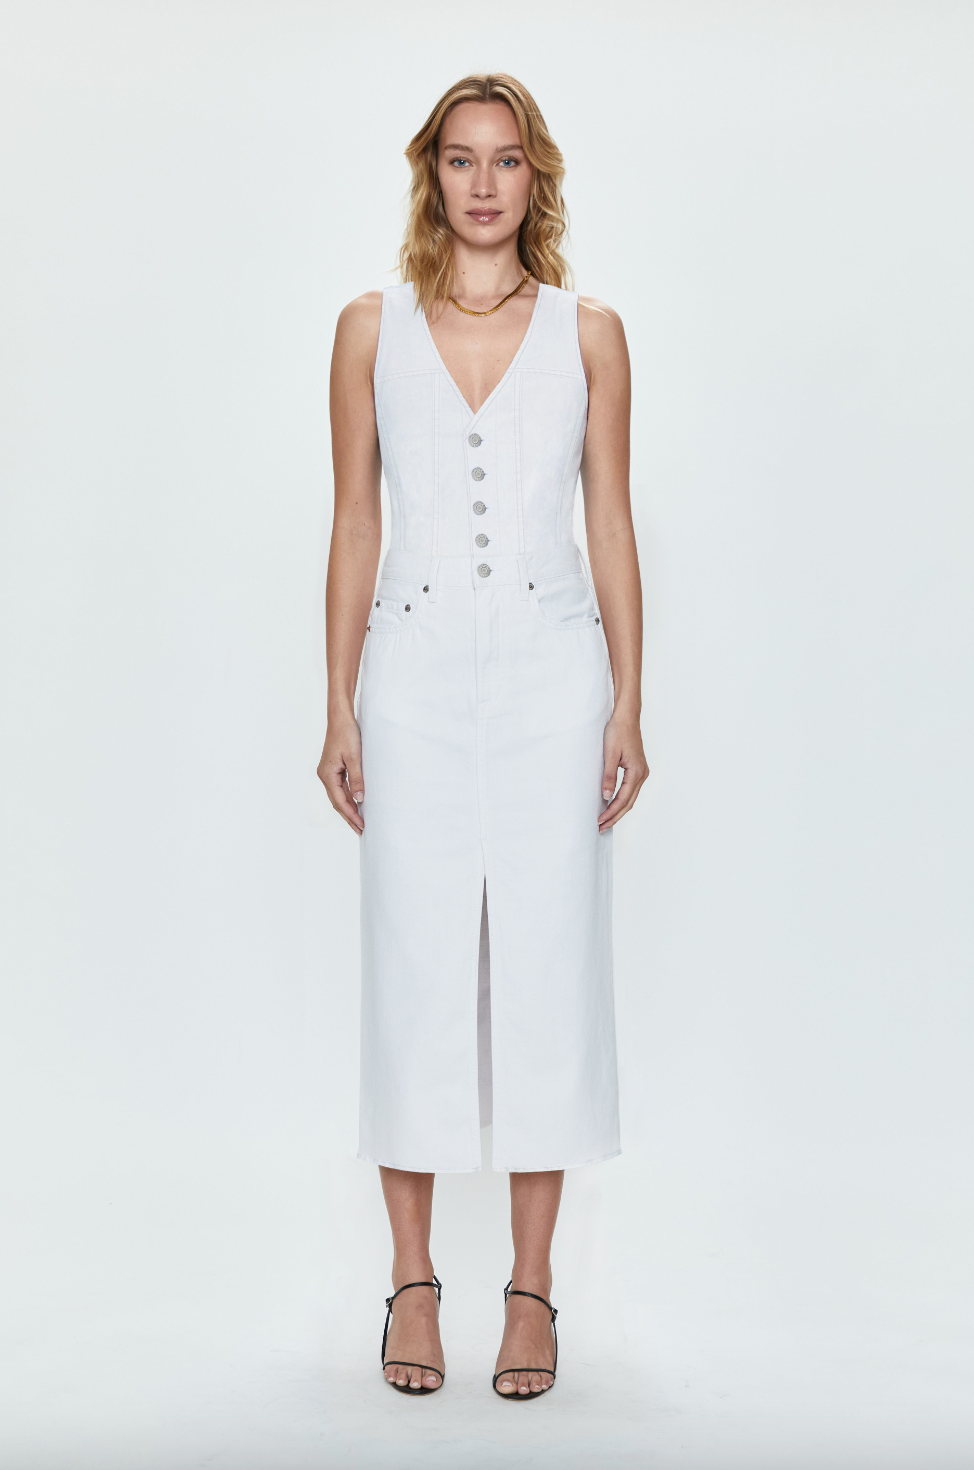 A Los Angeles-based woman wearing a stylish white sleeveless Alex Dress by Pistola with buttons stands against a clean white background. She has shoulder-length blonde hair and is wearing black strappy sandals.